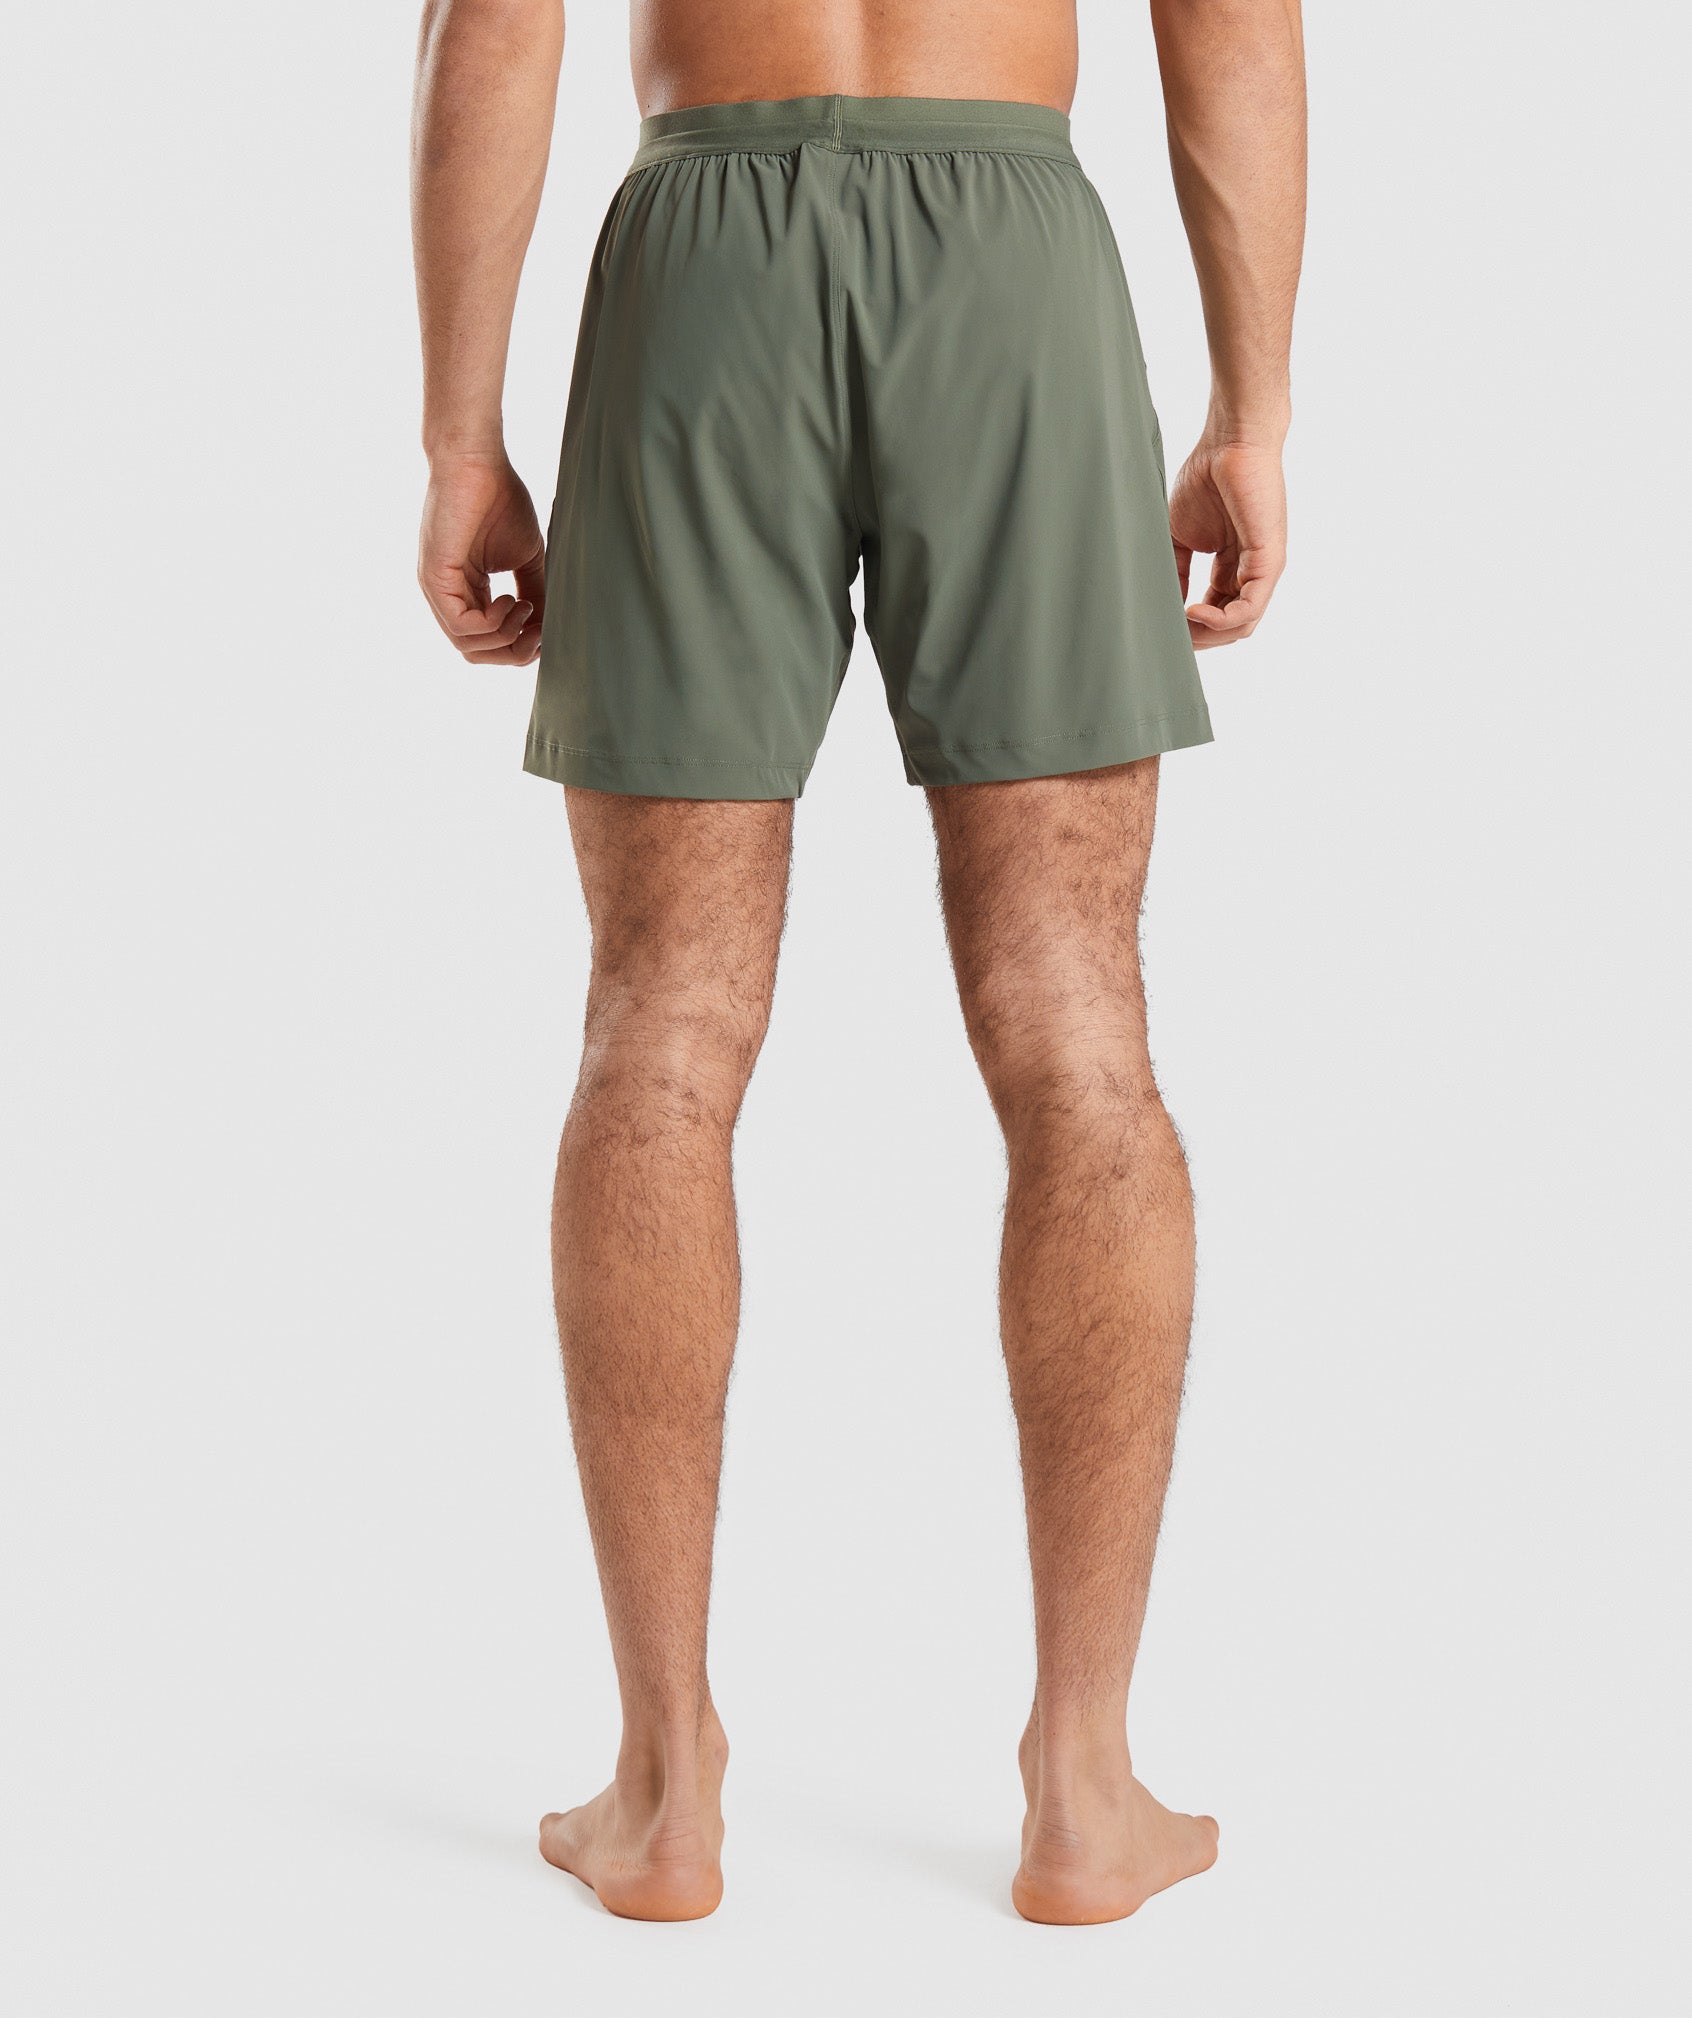 Studio Shorts in Core Olive - view 2